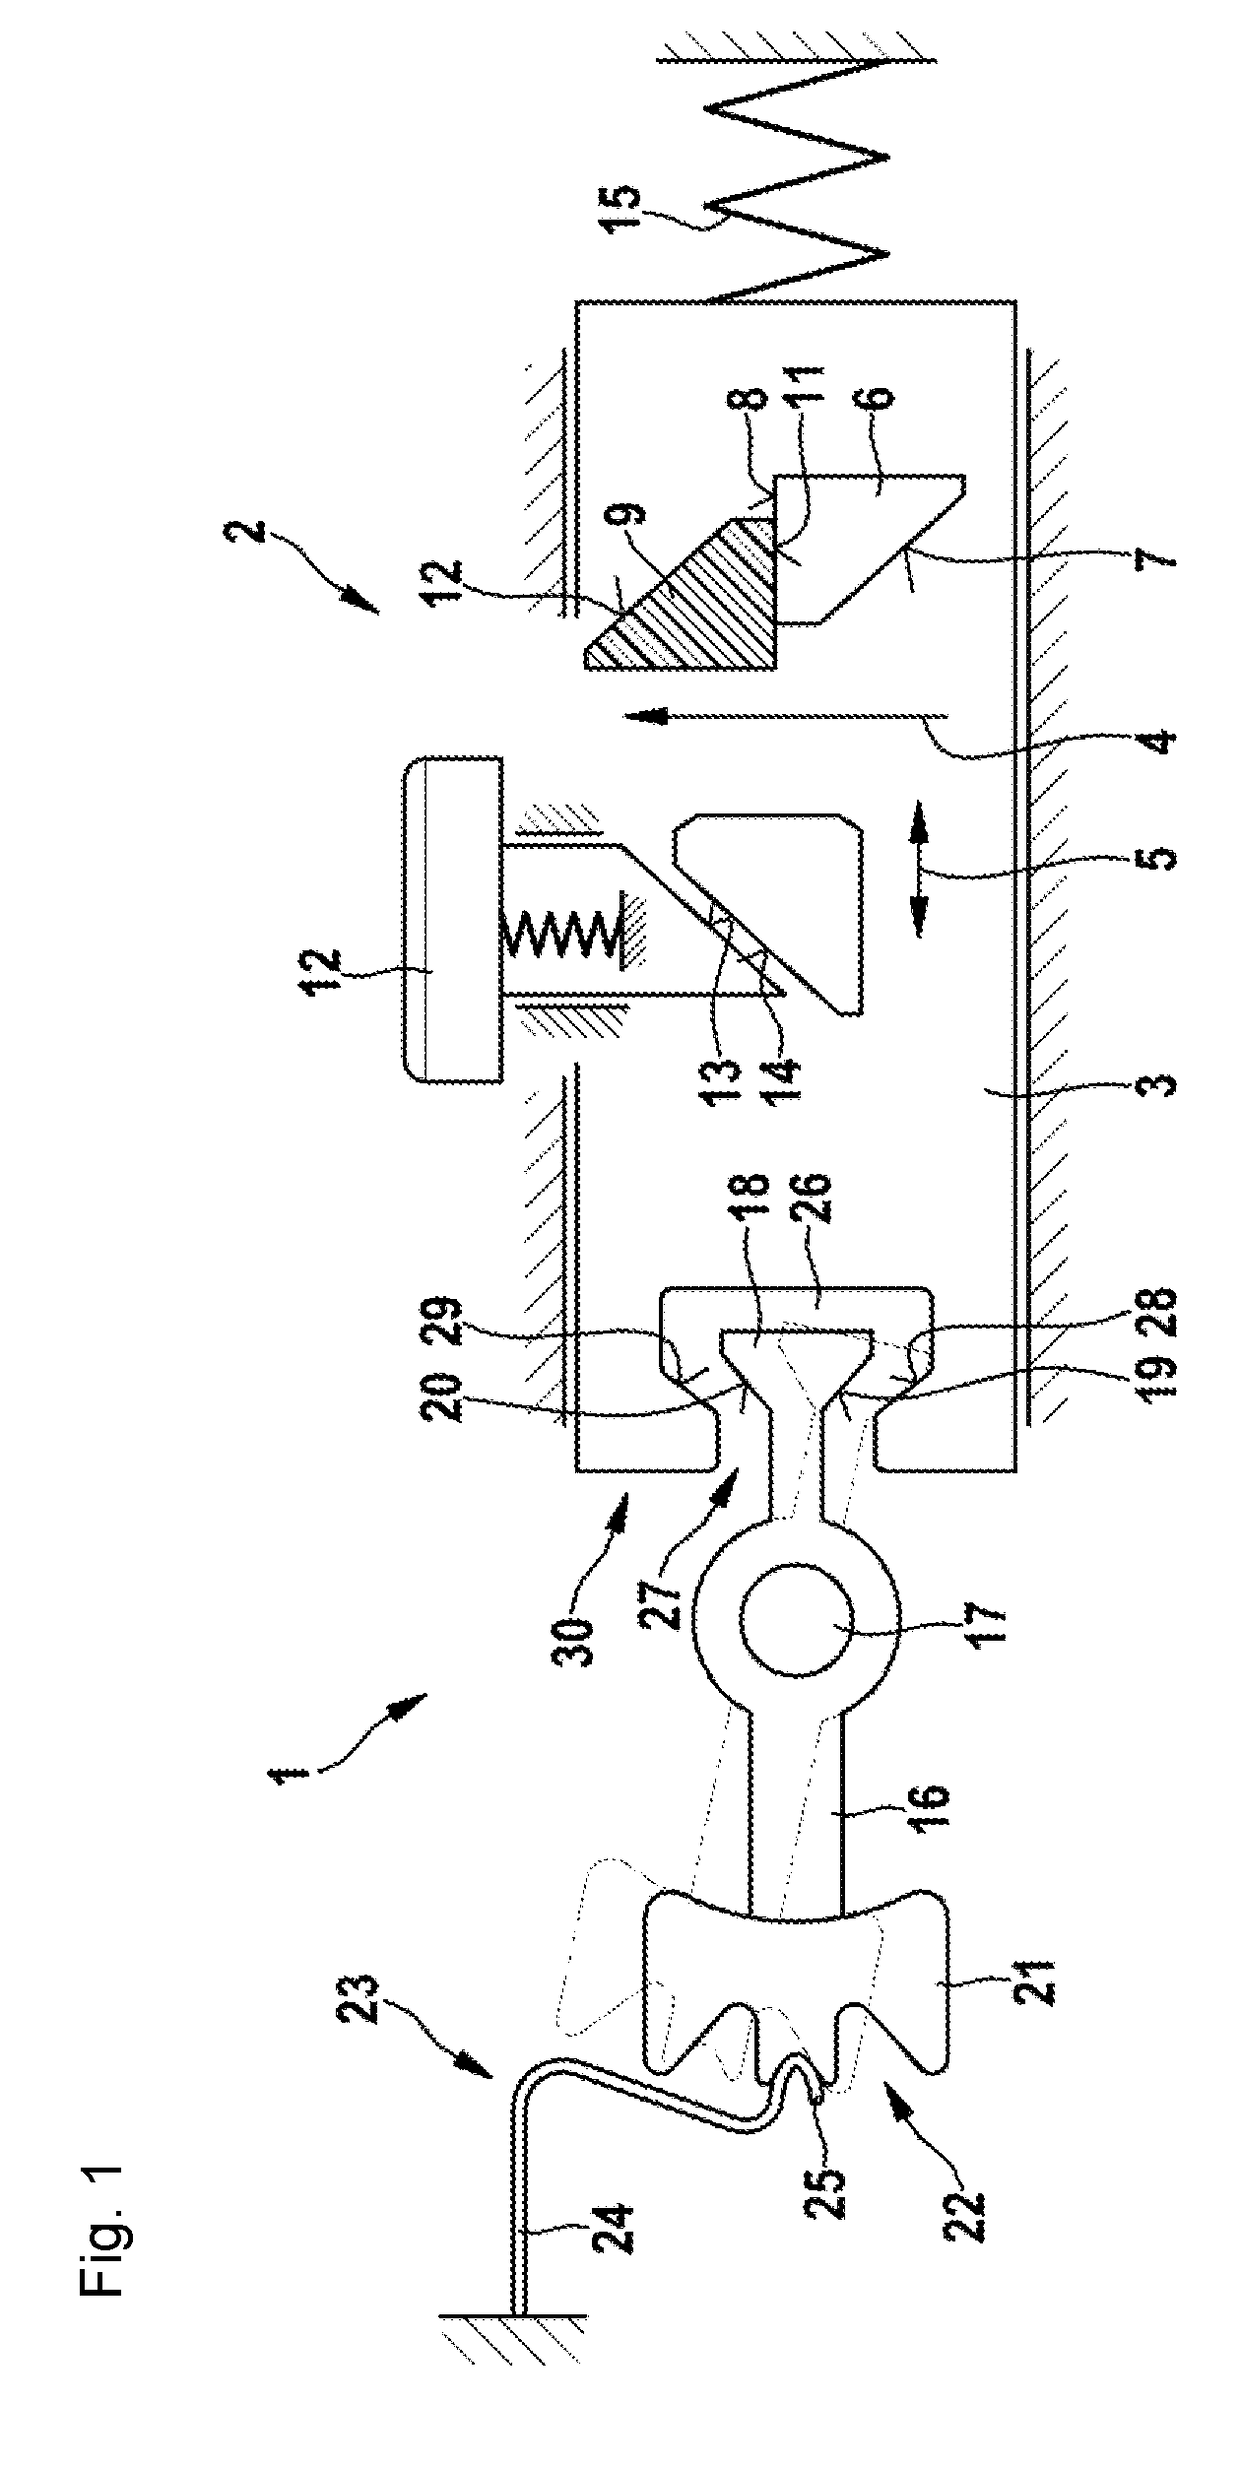 Receptacle comprising a safety locking mechanism for a vehicle